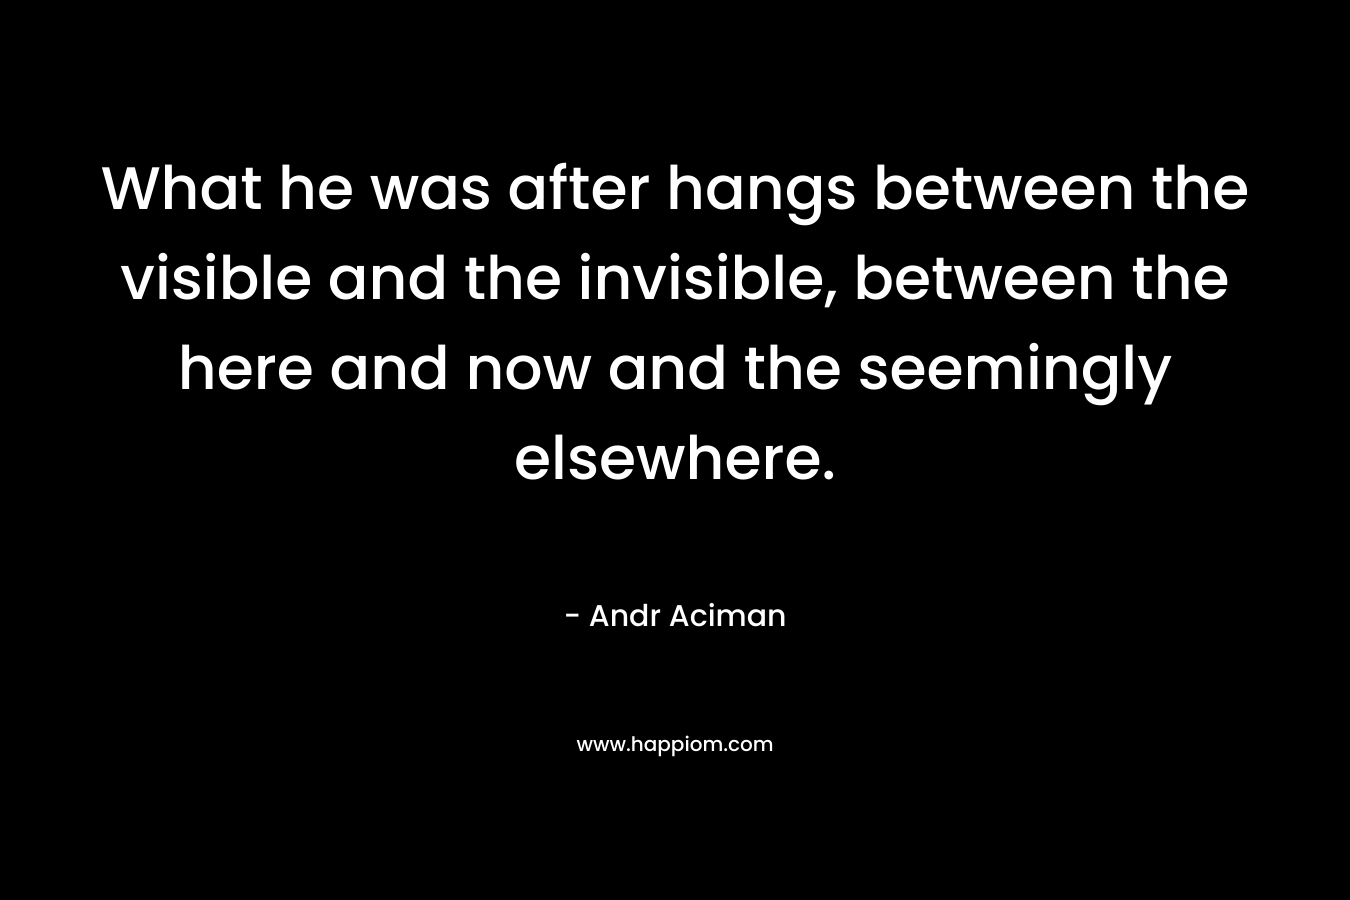 What he was after hangs between the visible and the invisible, between the here and now and the seemingly elsewhere. – Andr Aciman